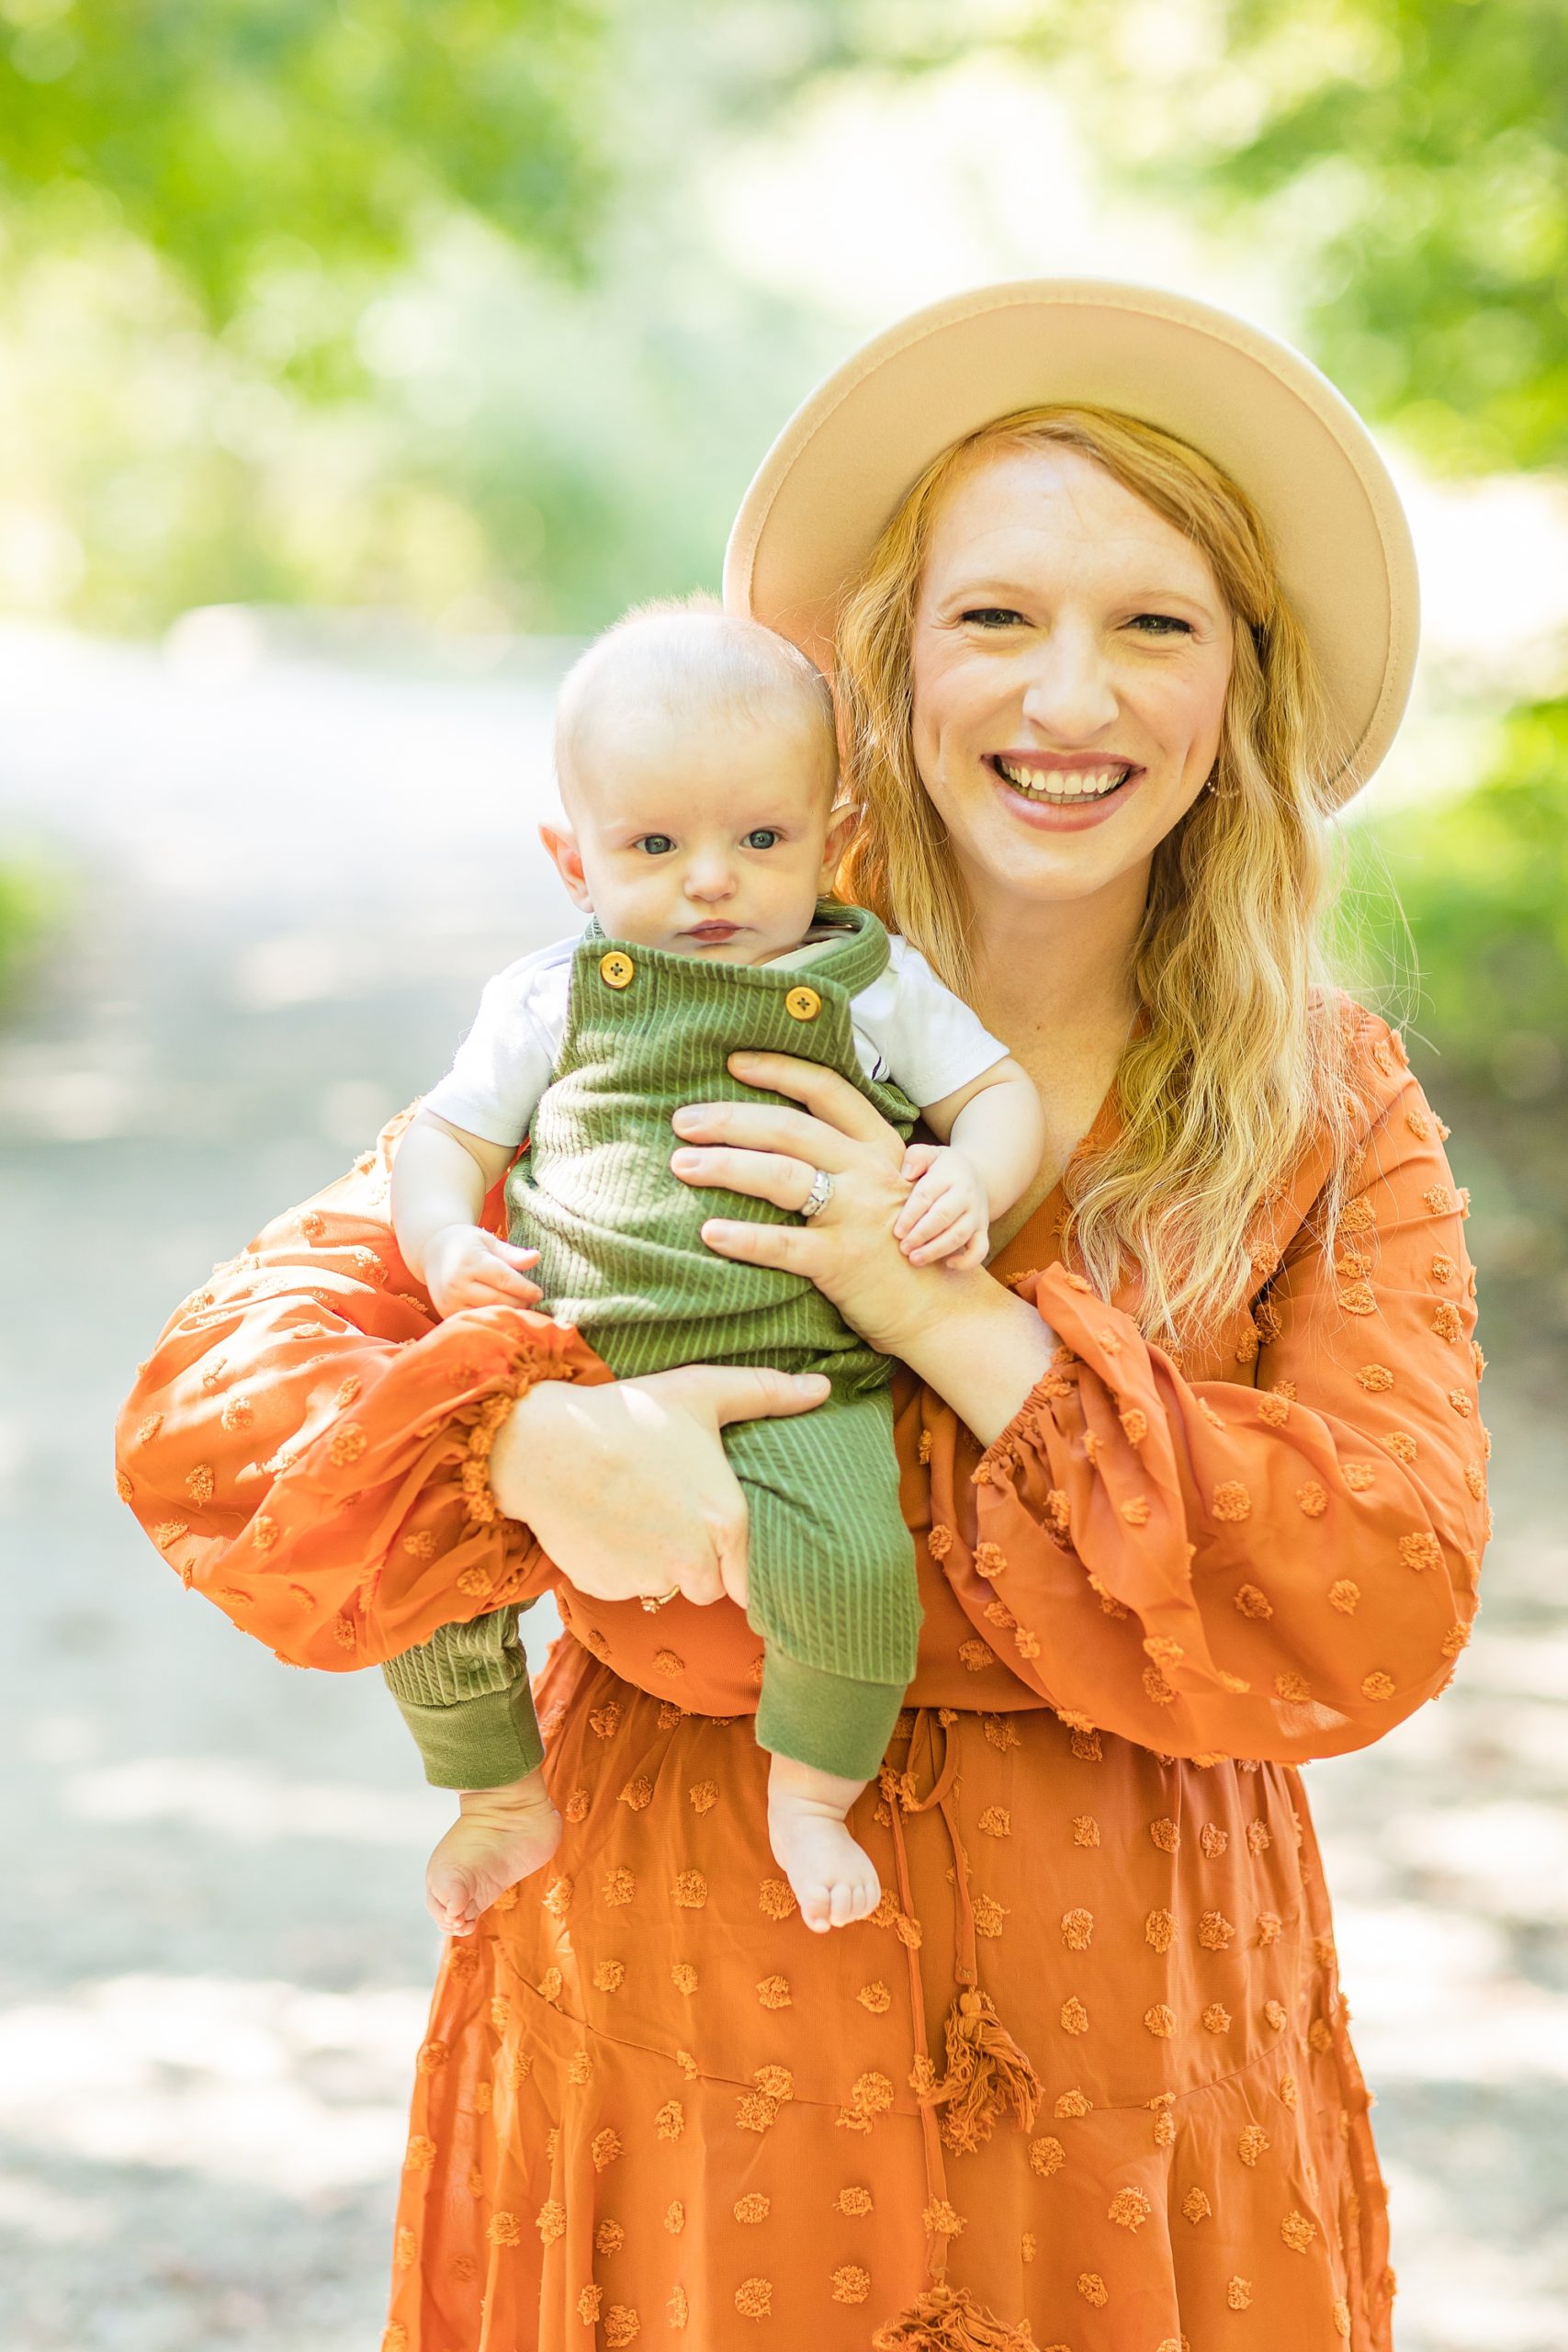 mom in orange dress poses with 6 month old baby in overalls